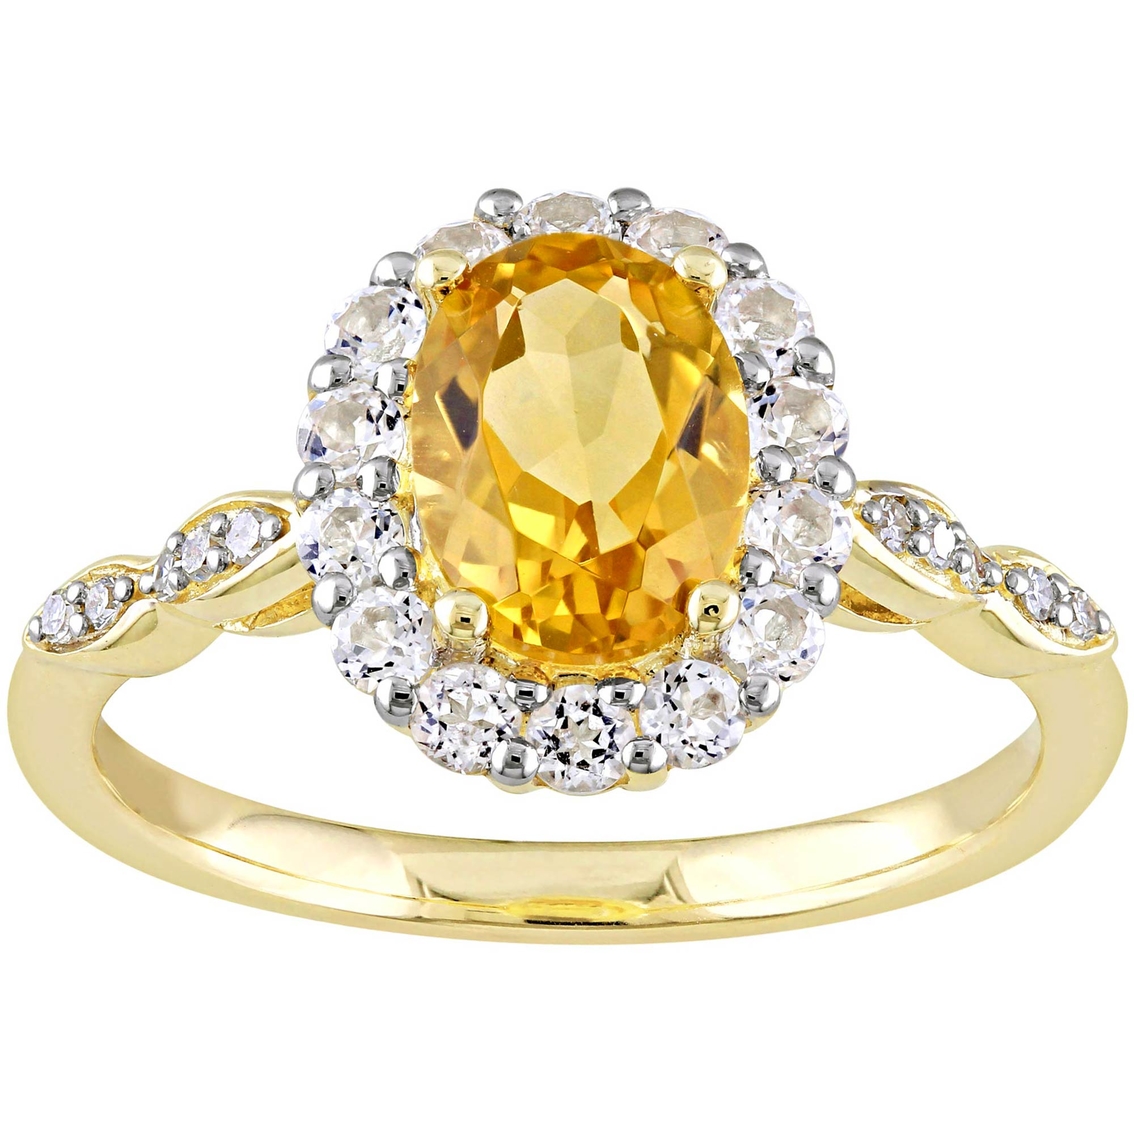 Sofia B. 14K Yellow Gold Citrine and White Topaz and Diamond Accent Halo Ring - Image 1 of 4